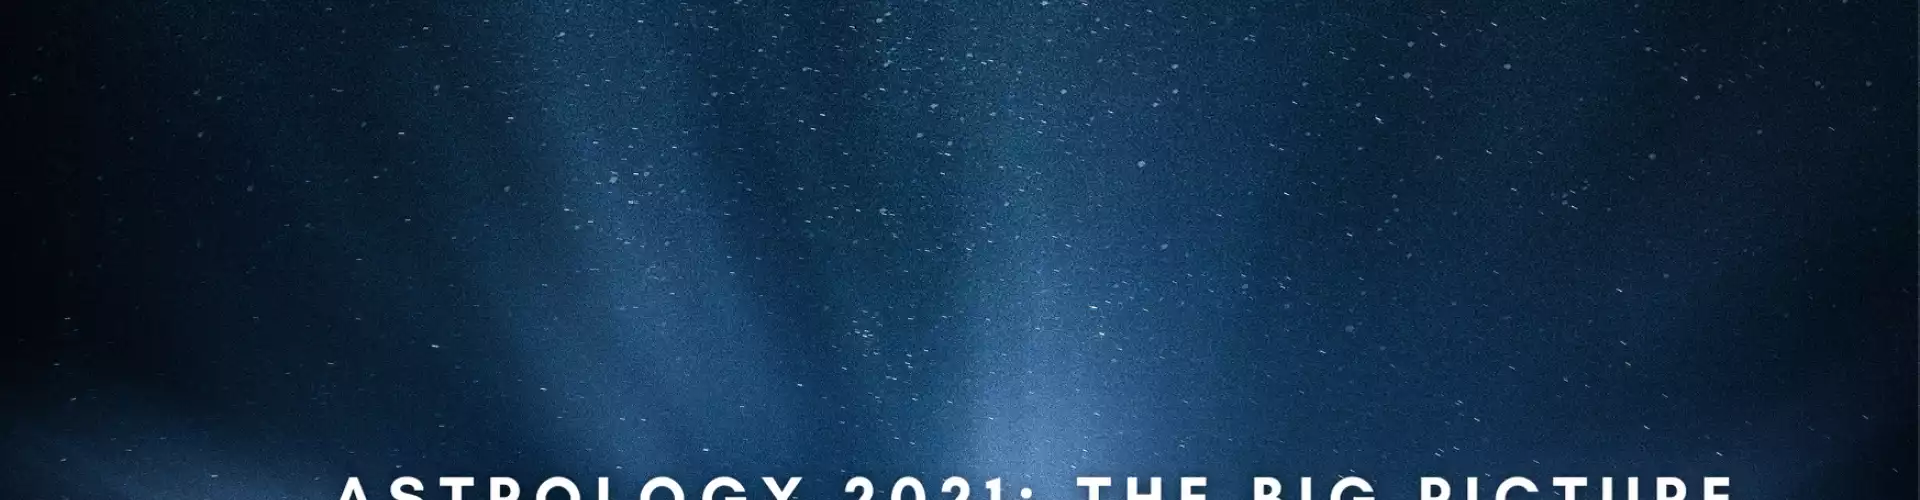 Astrology 2021: The Big Picture